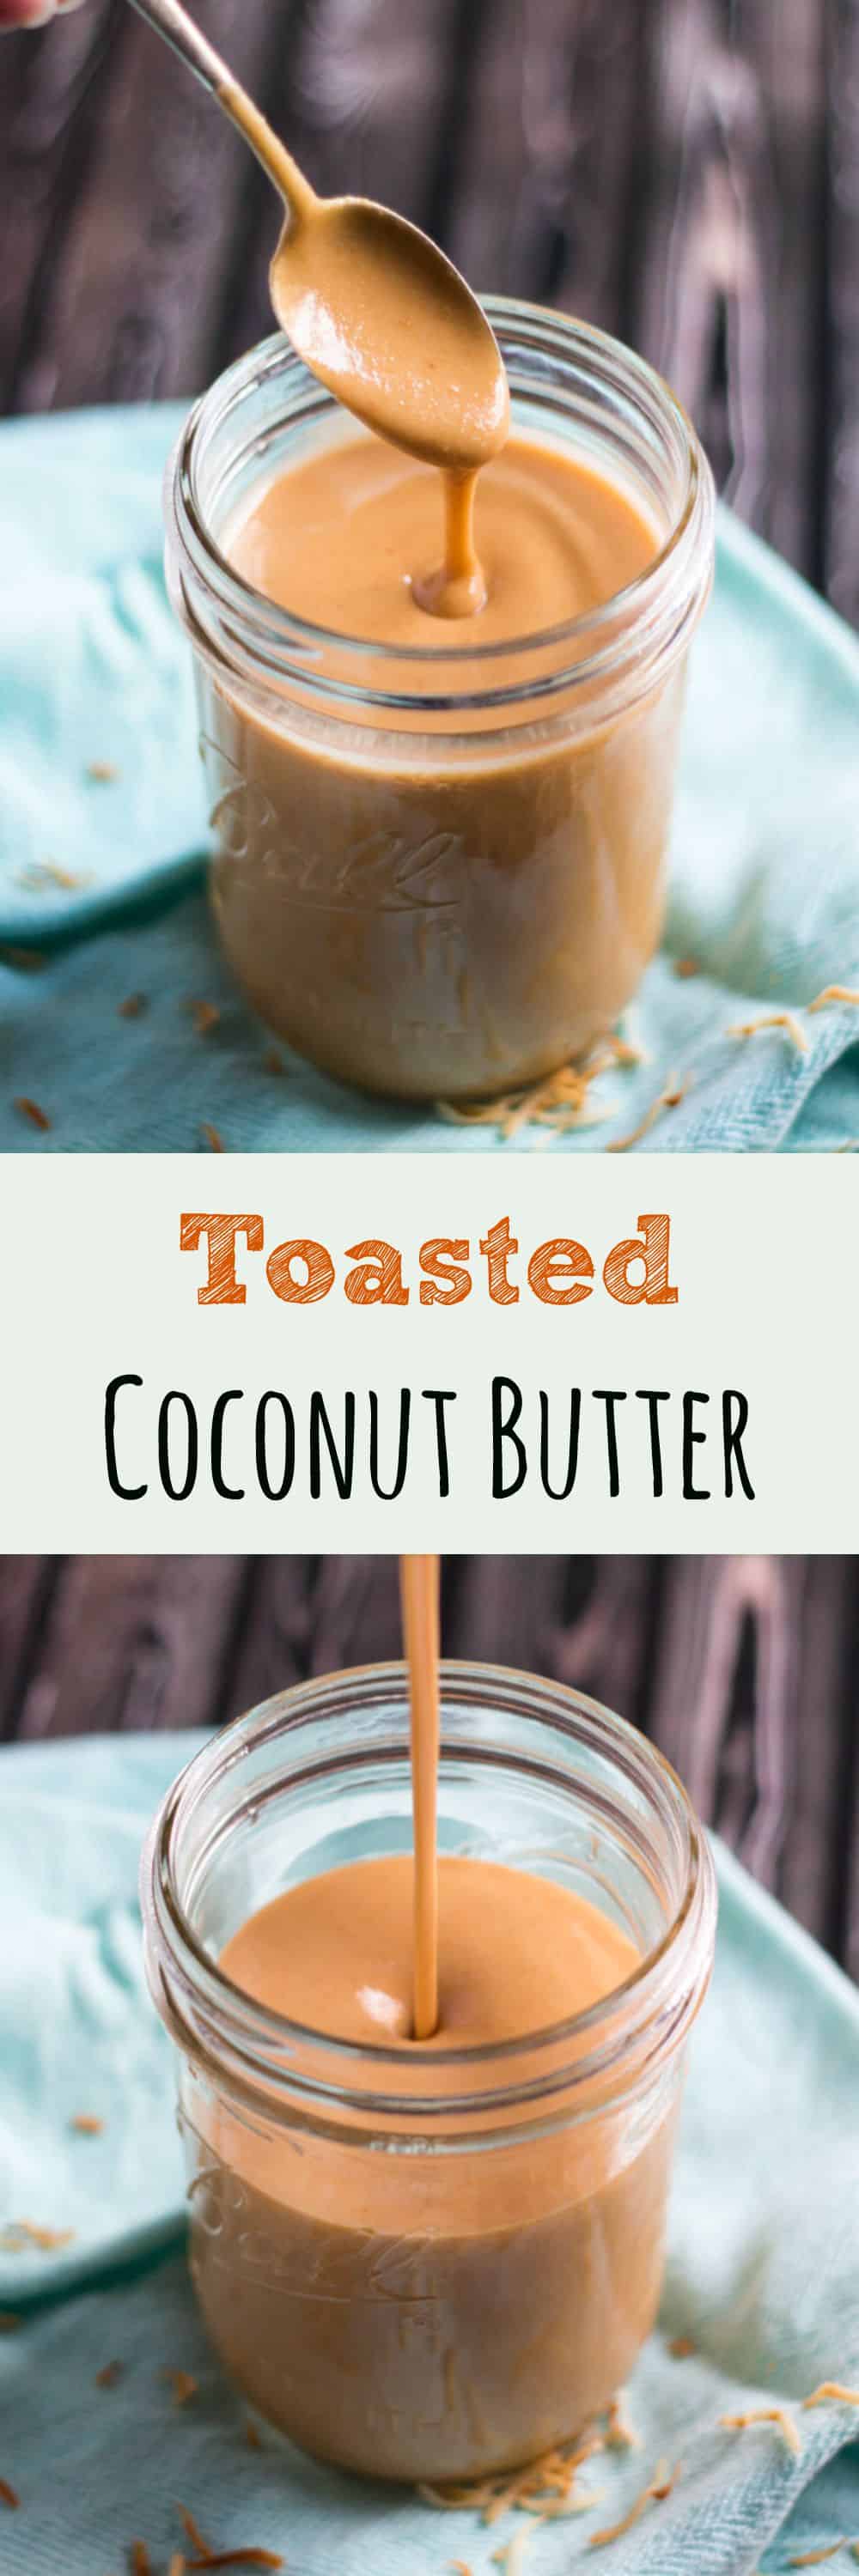 Just when you thought there was nothing better than coconut butter, introducing Toasted Coconut Butter. Use anywhere you would original coconut butter.